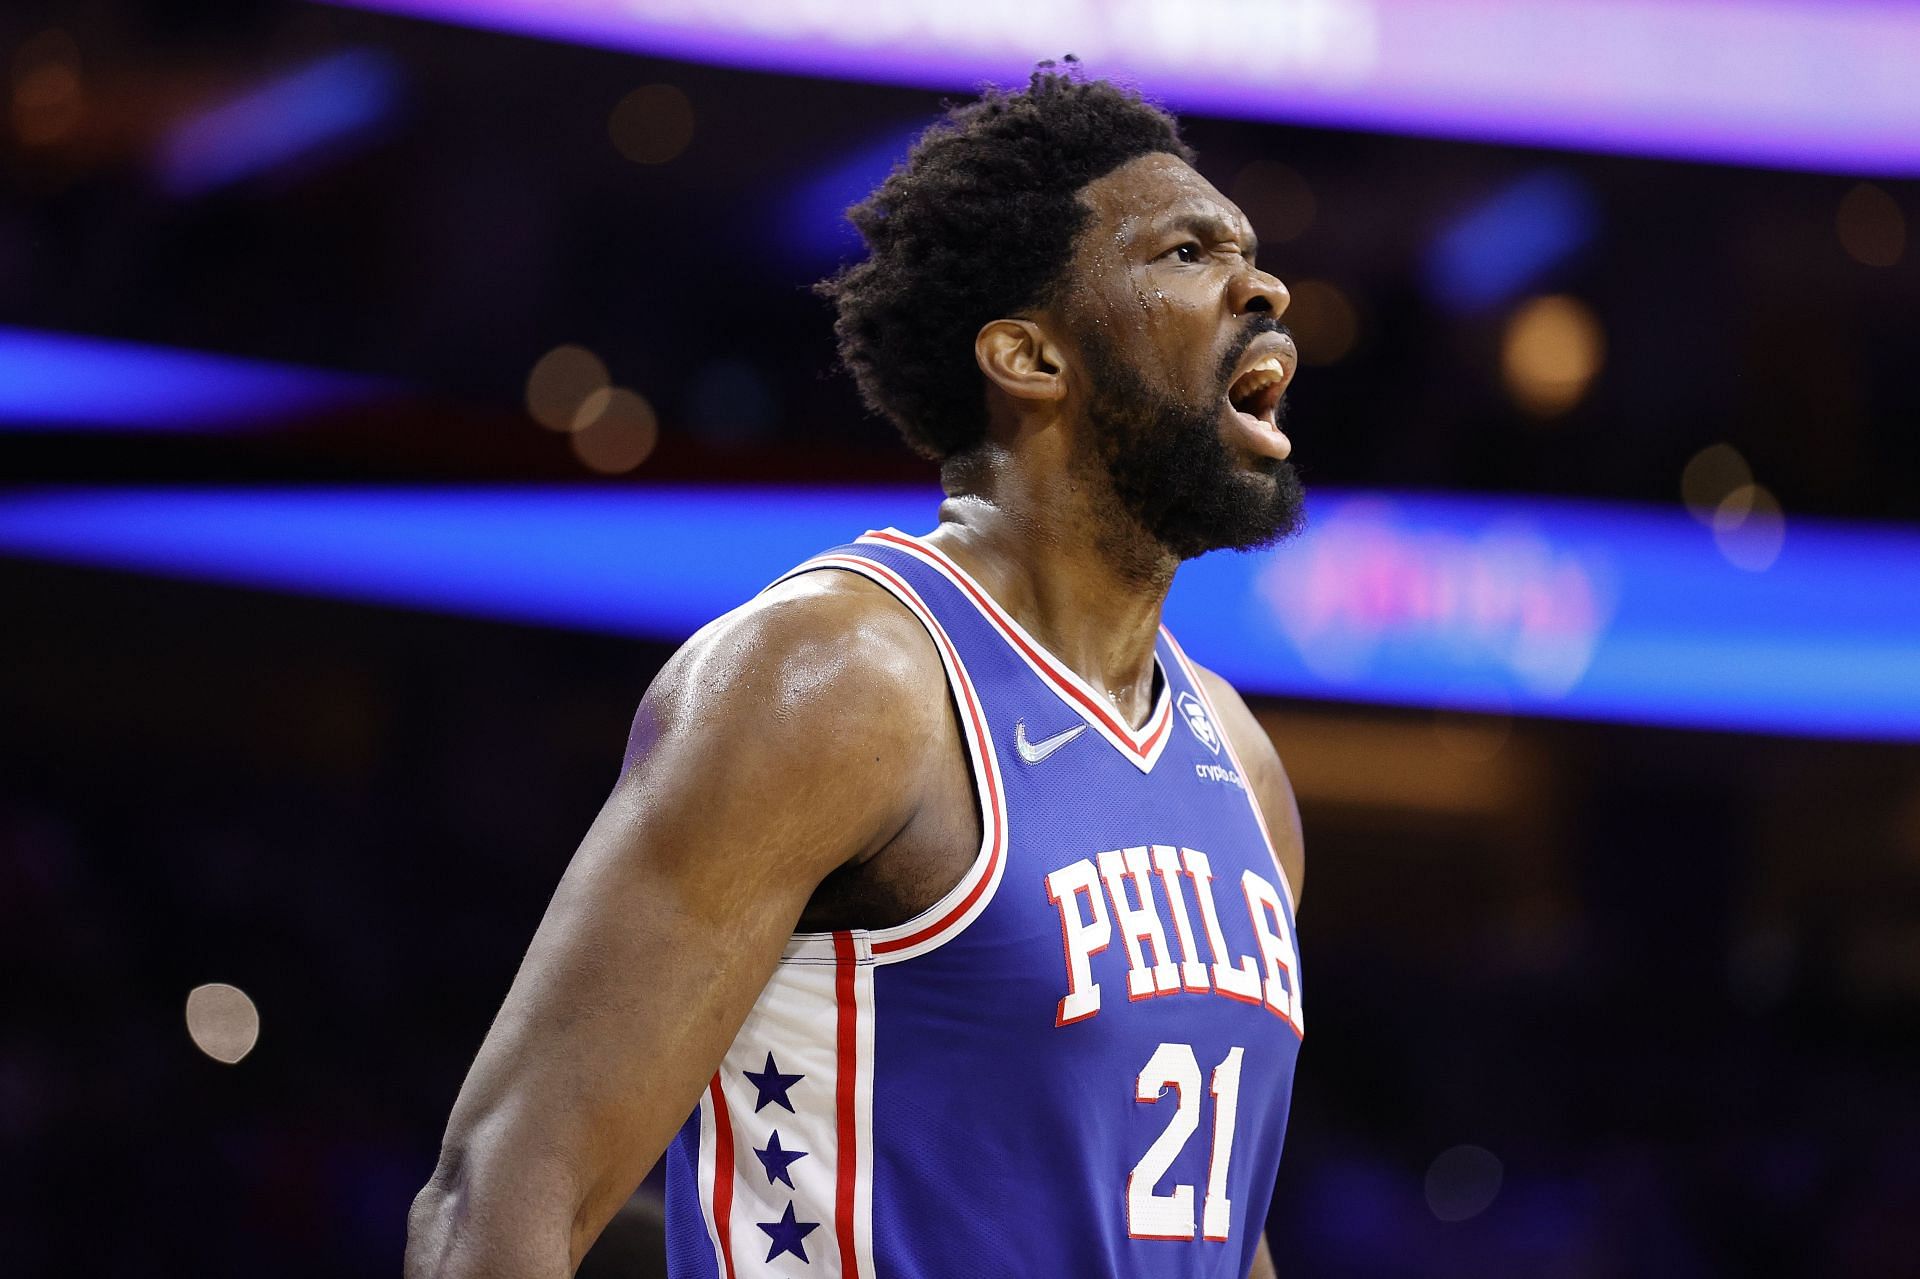 Joel Embiid No. 21 of the Philadelphia 76ers reacts after scoring during the second quarter against the Toronto Raptors.